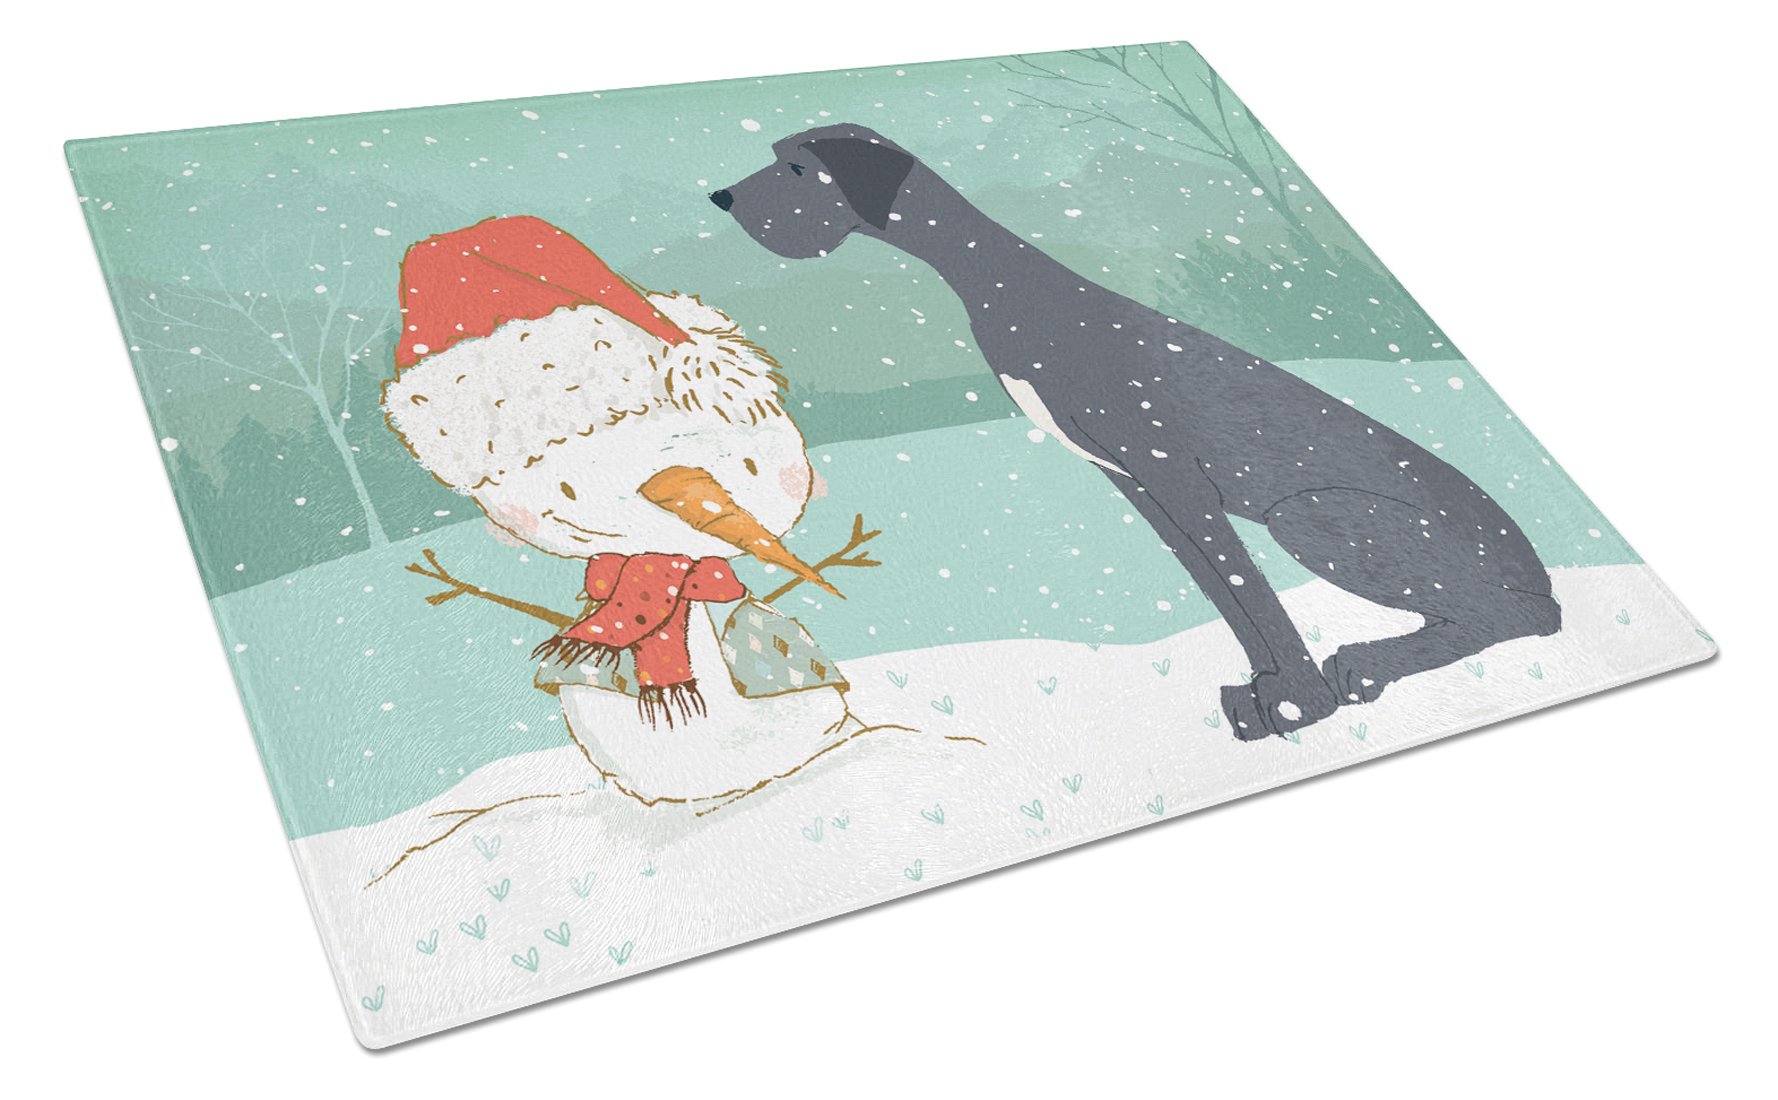 Black Great Dane and Snowman Christmas Glass Cutting Board Large CK2039LCB by Caroline's Treasures